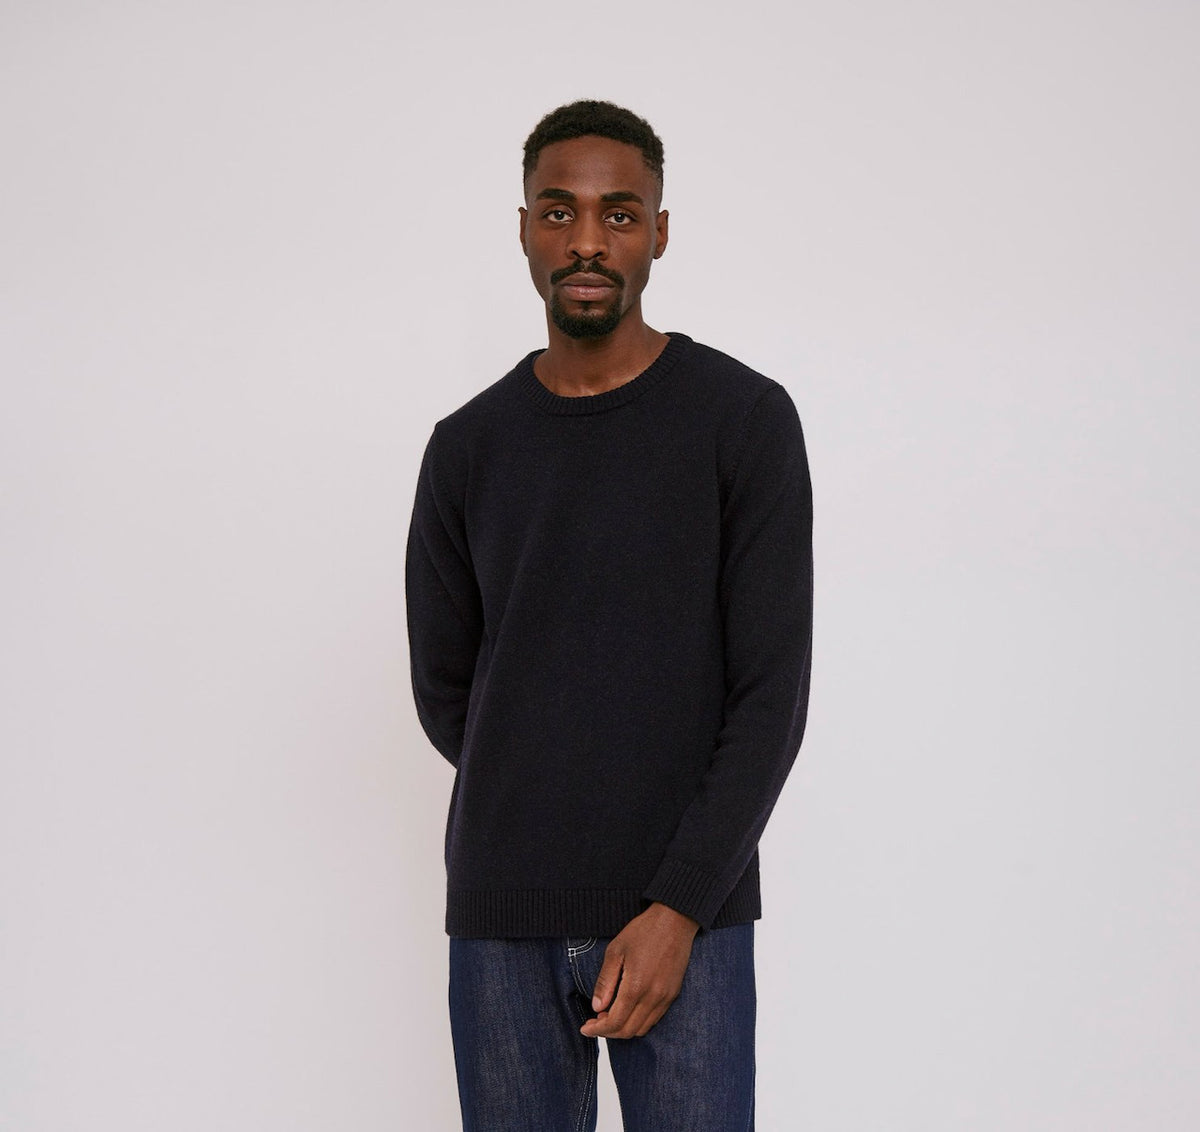 The model is wearing an Organic Basics Recycled Wool Knit Jumper – Navy and jeans.